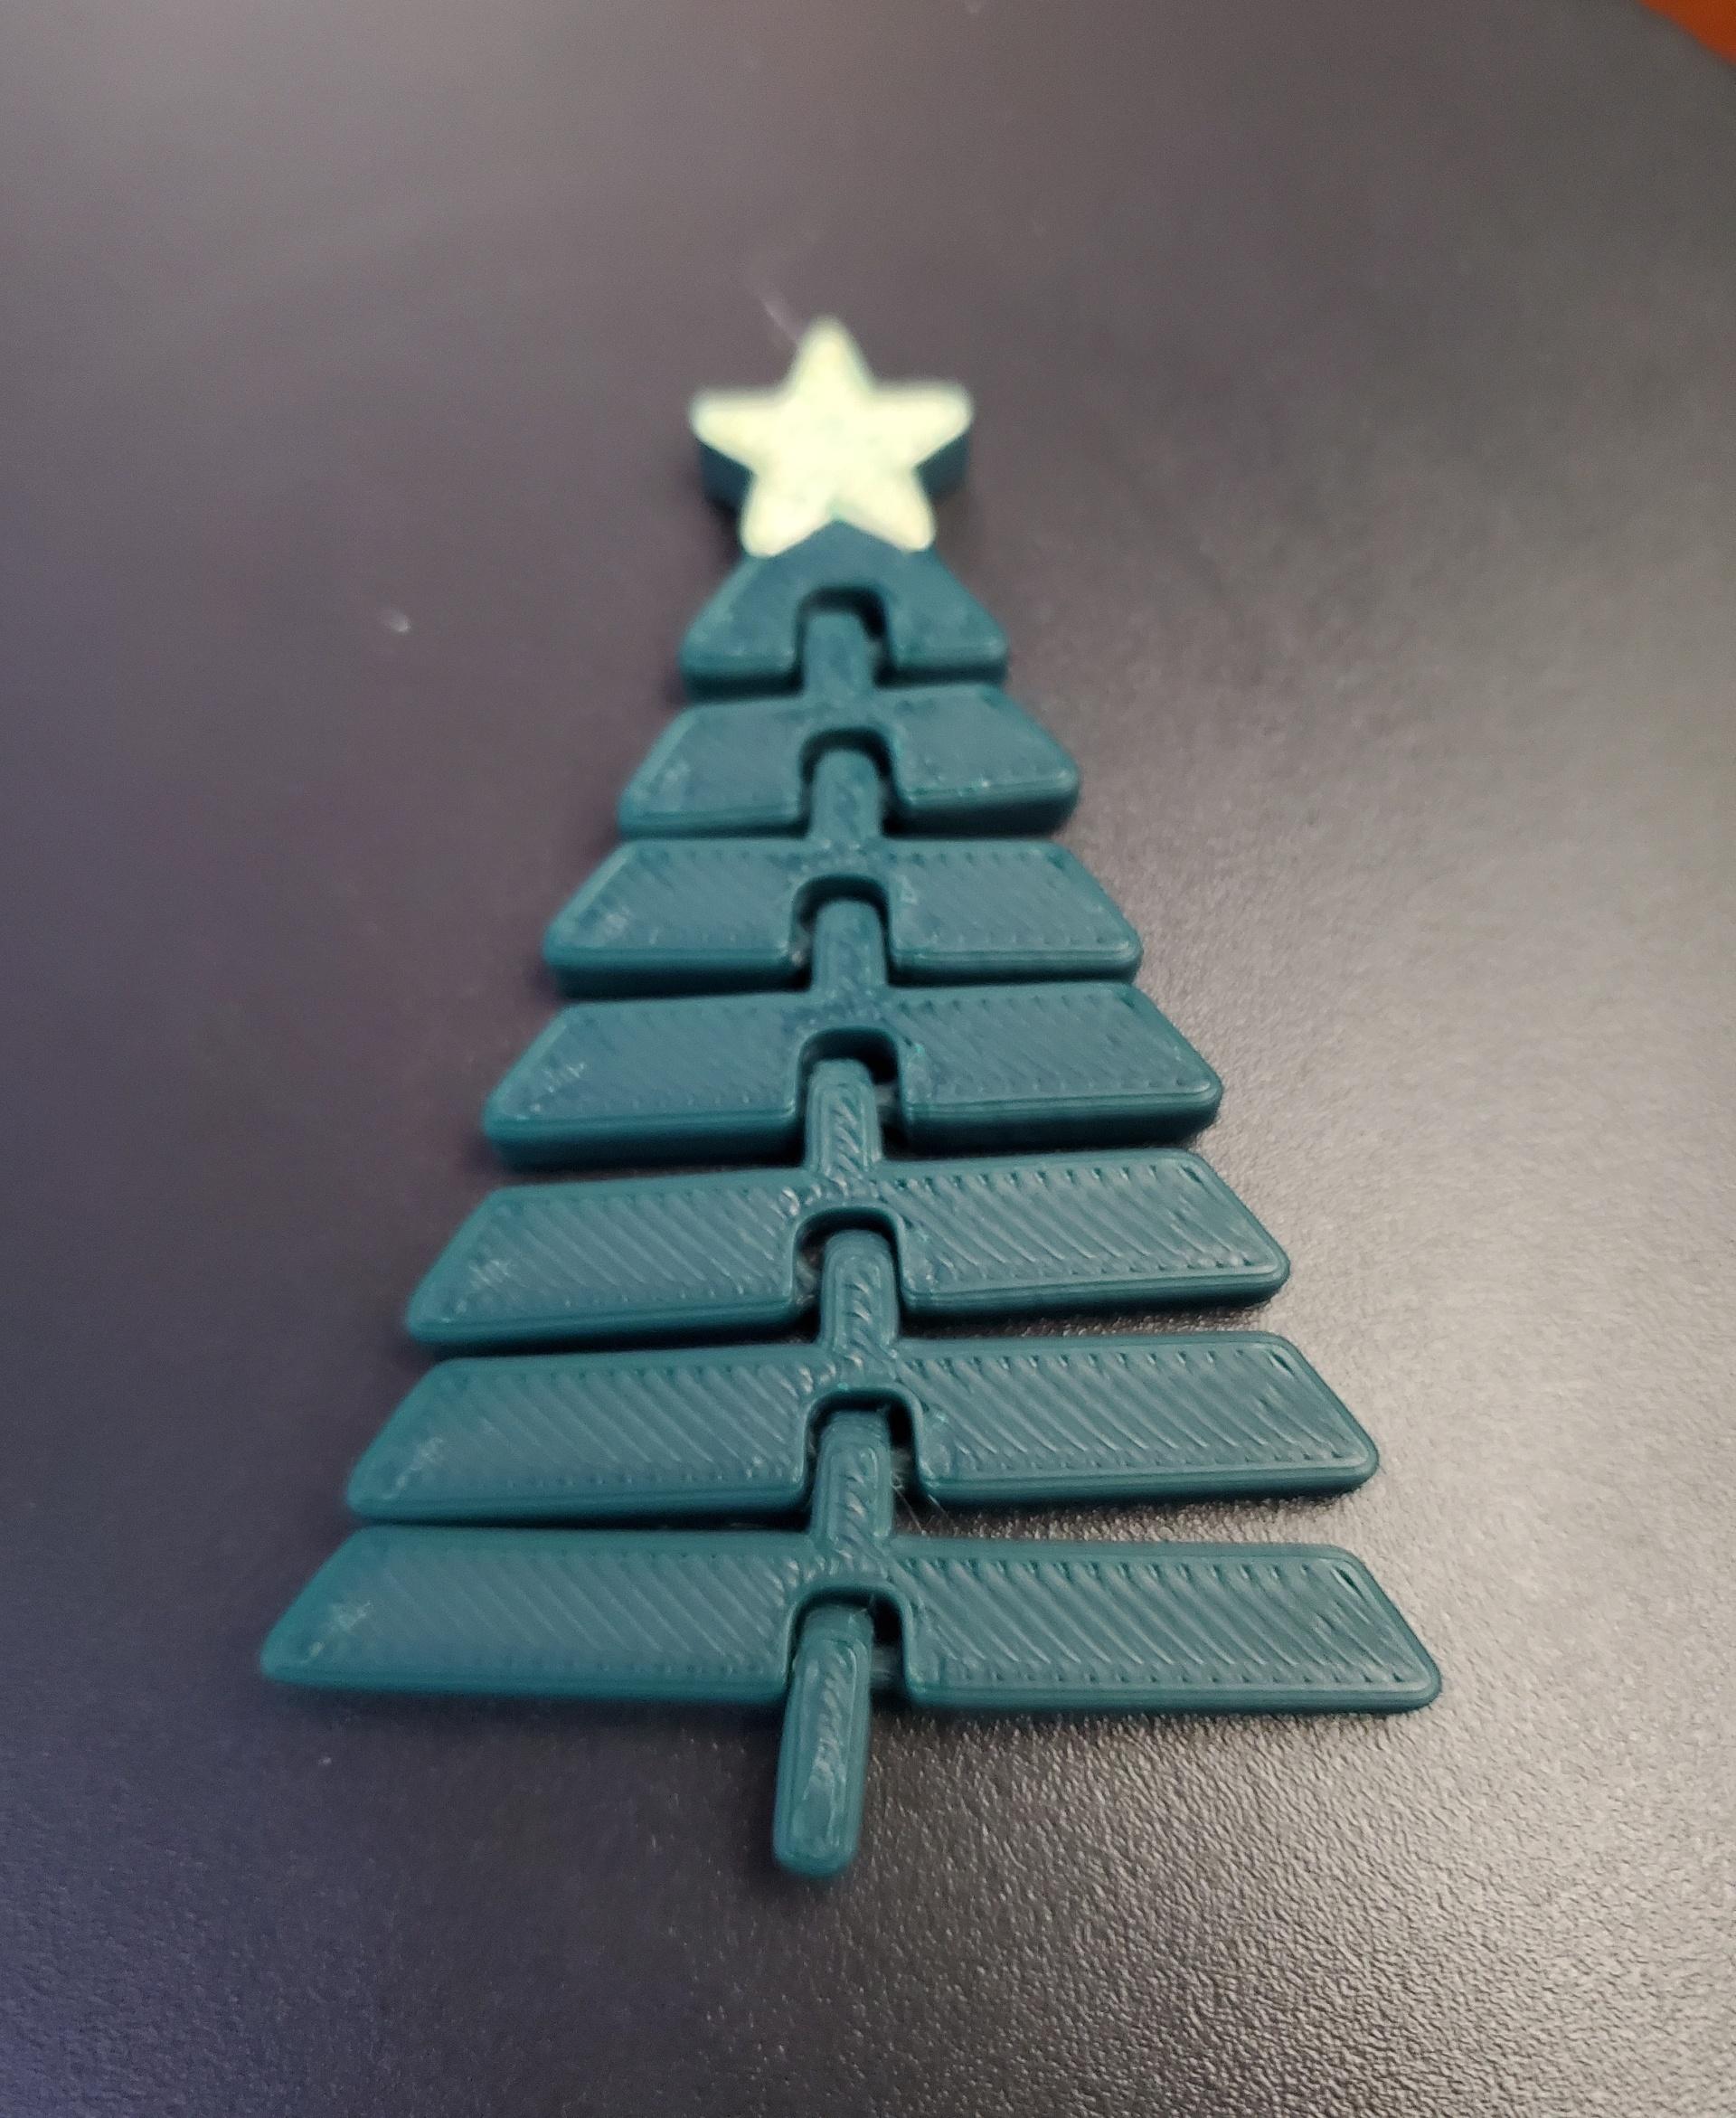 Articulated Christmas Tree with Star - Print in place fidget toy - 3mf - polymaker pla pro blue-green - 3d model